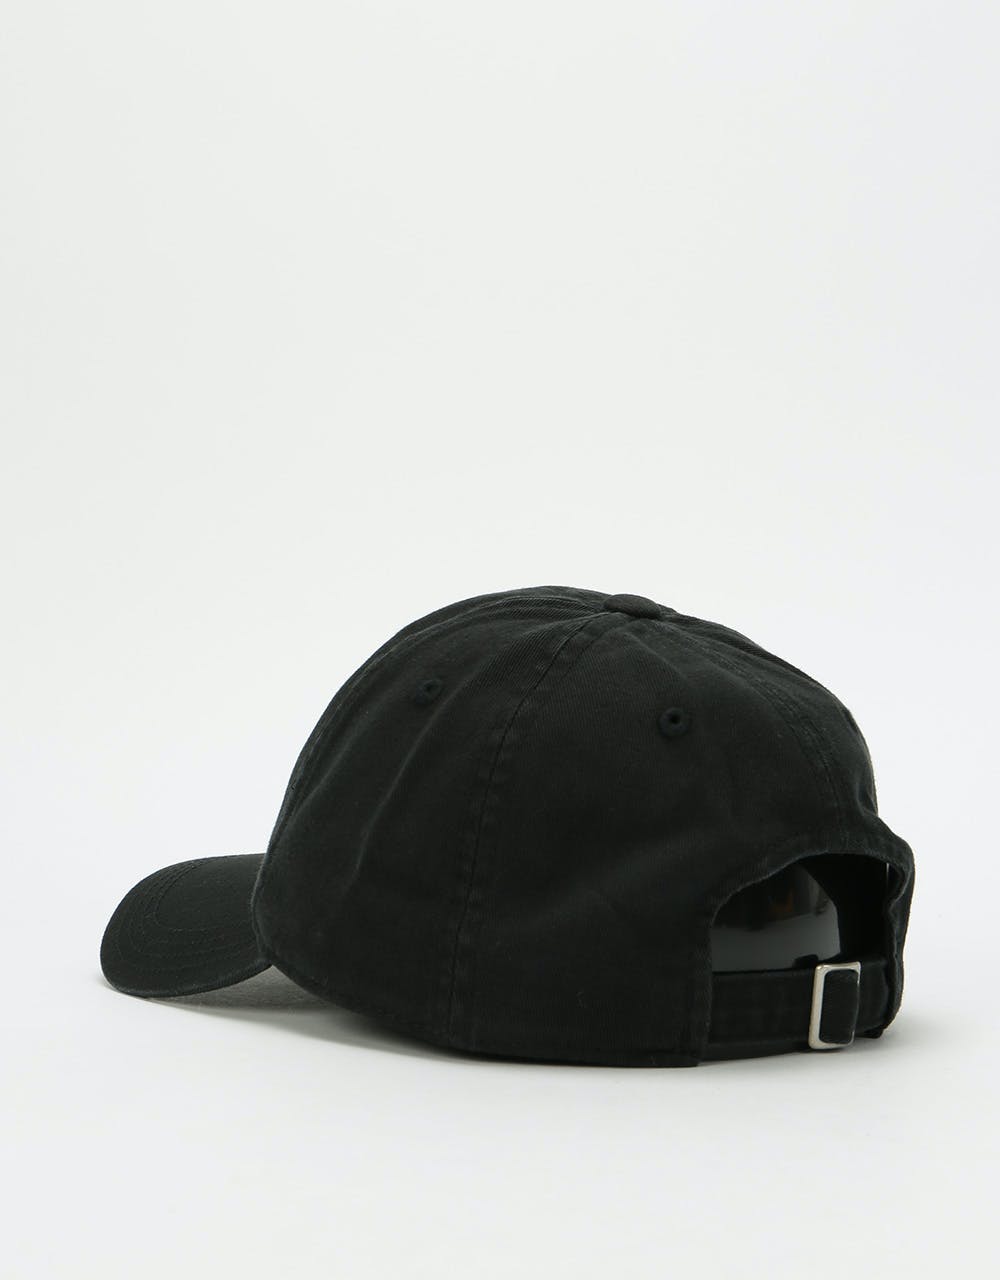 Route One Shade Cap - Black